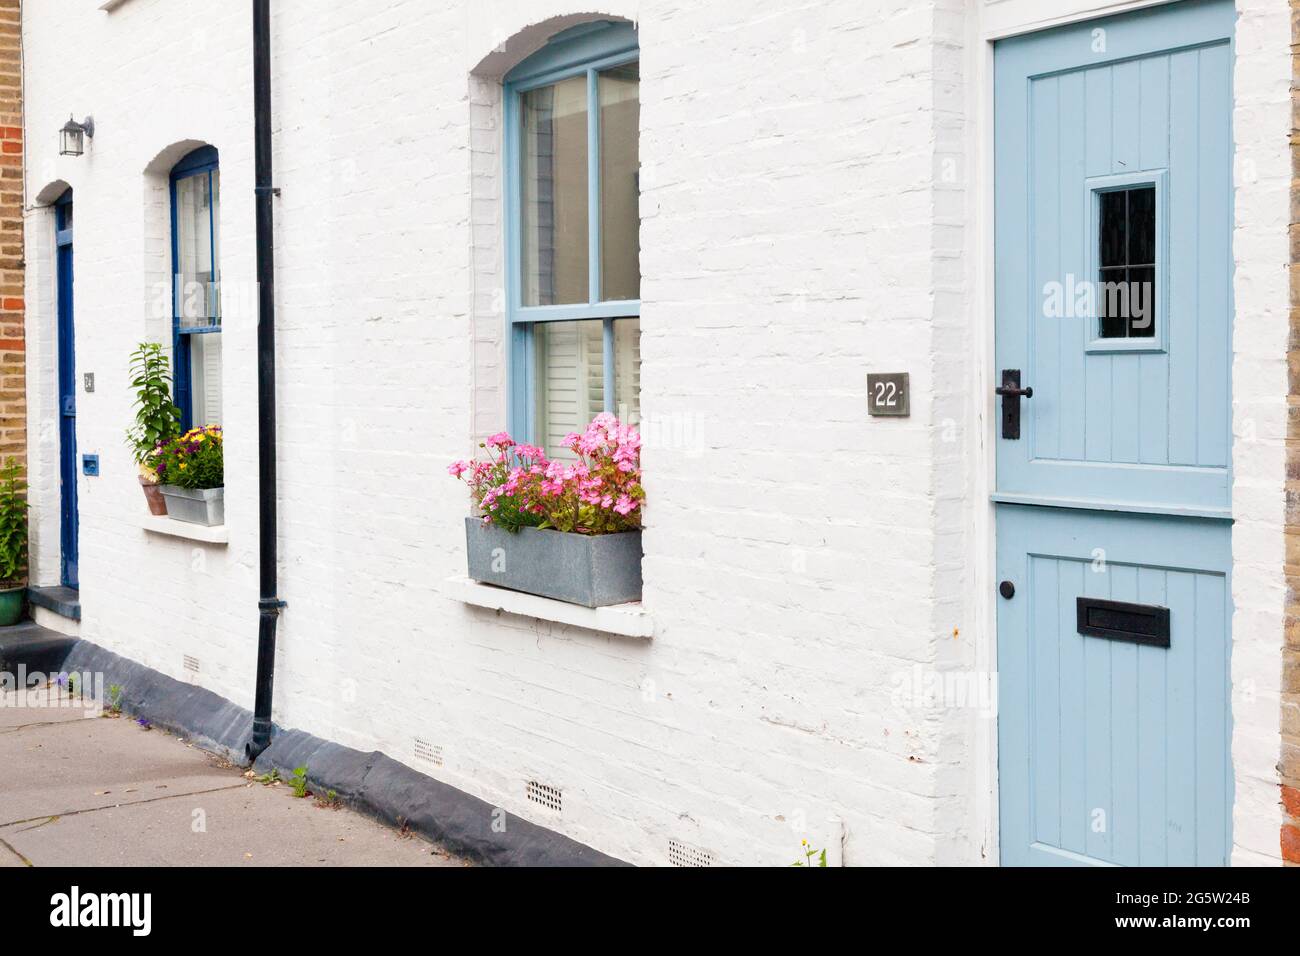 Street doors to an urban cottages, with flower containers, UK. Stock Photo